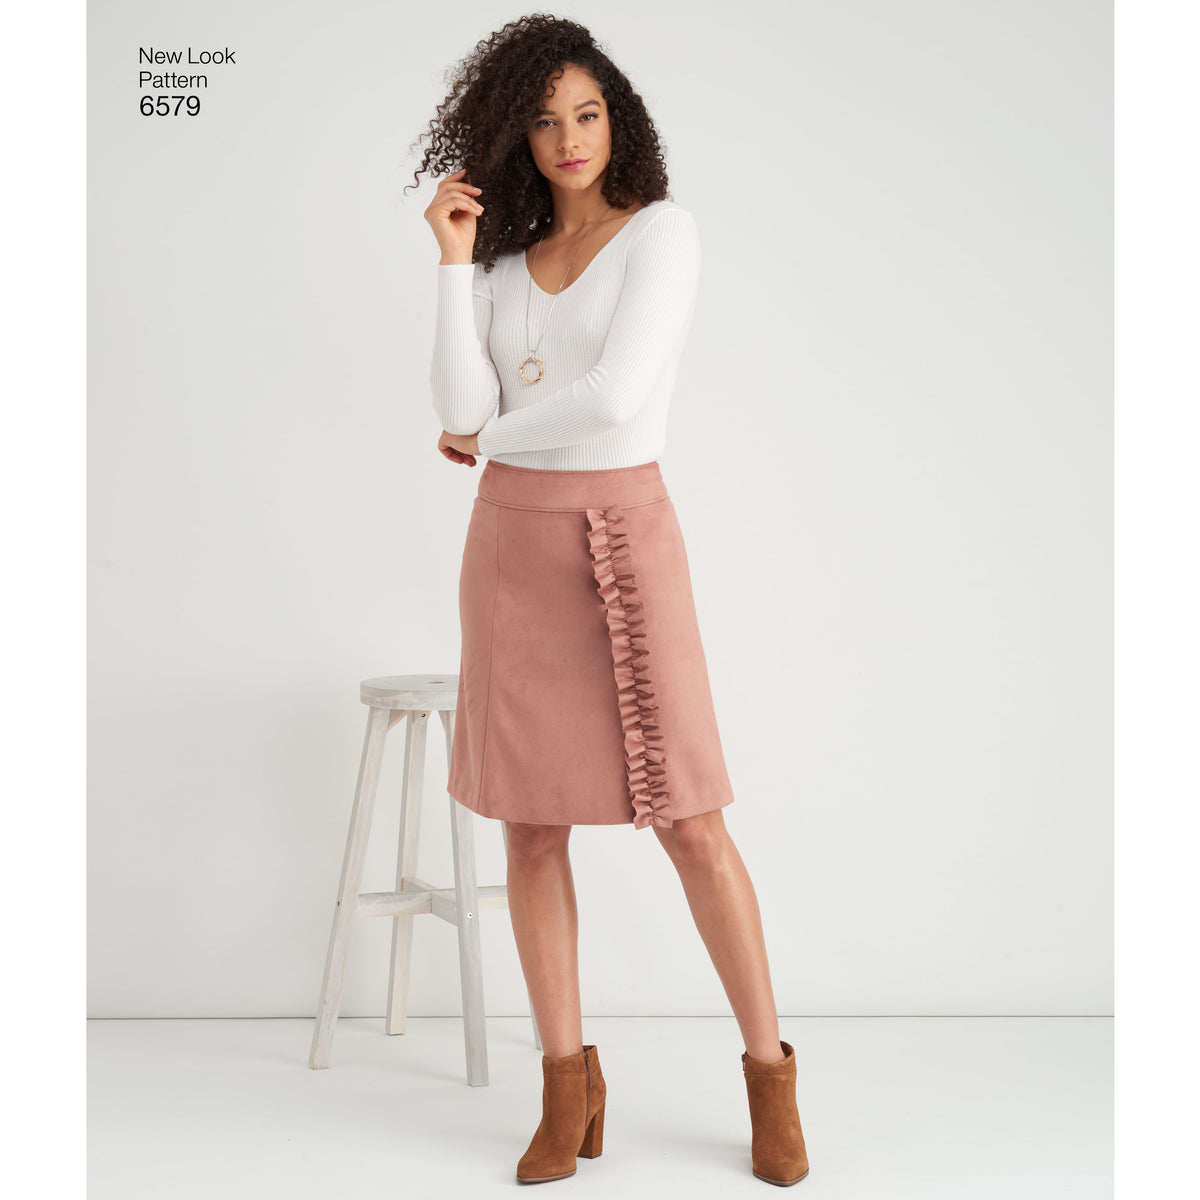 6579 New Look Pattern 6579 Misses' Skirts